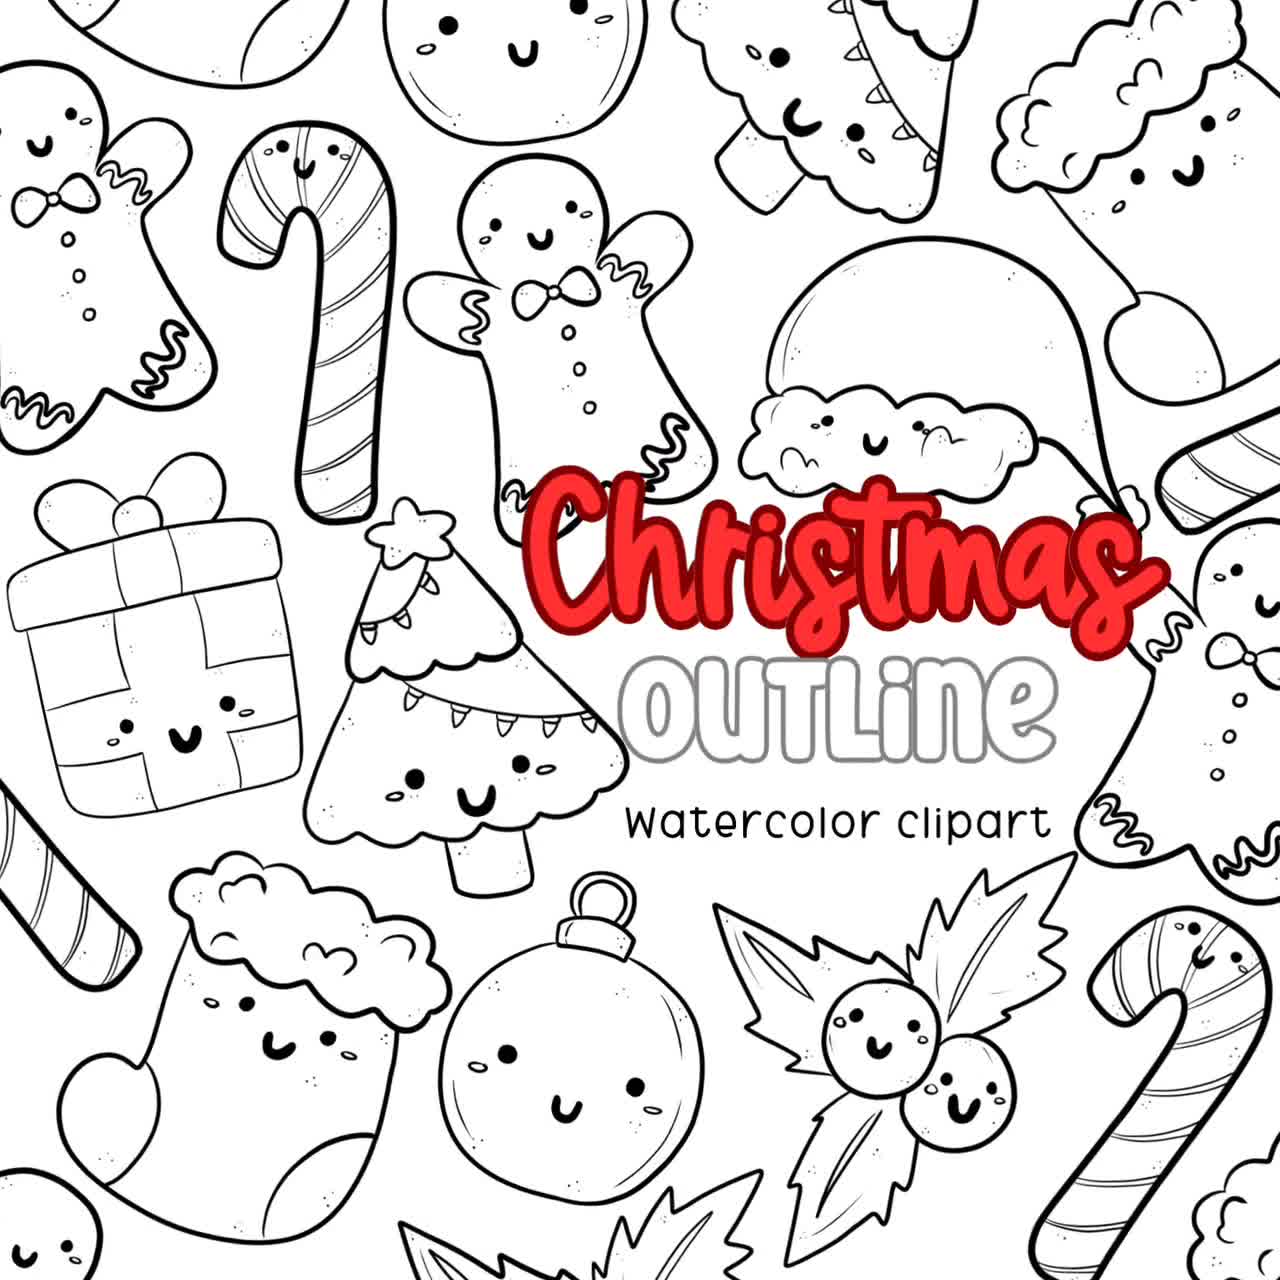 How to Draw Santa Claus Easy ❄️ Christmas Holiday Squishmallows - YouTube